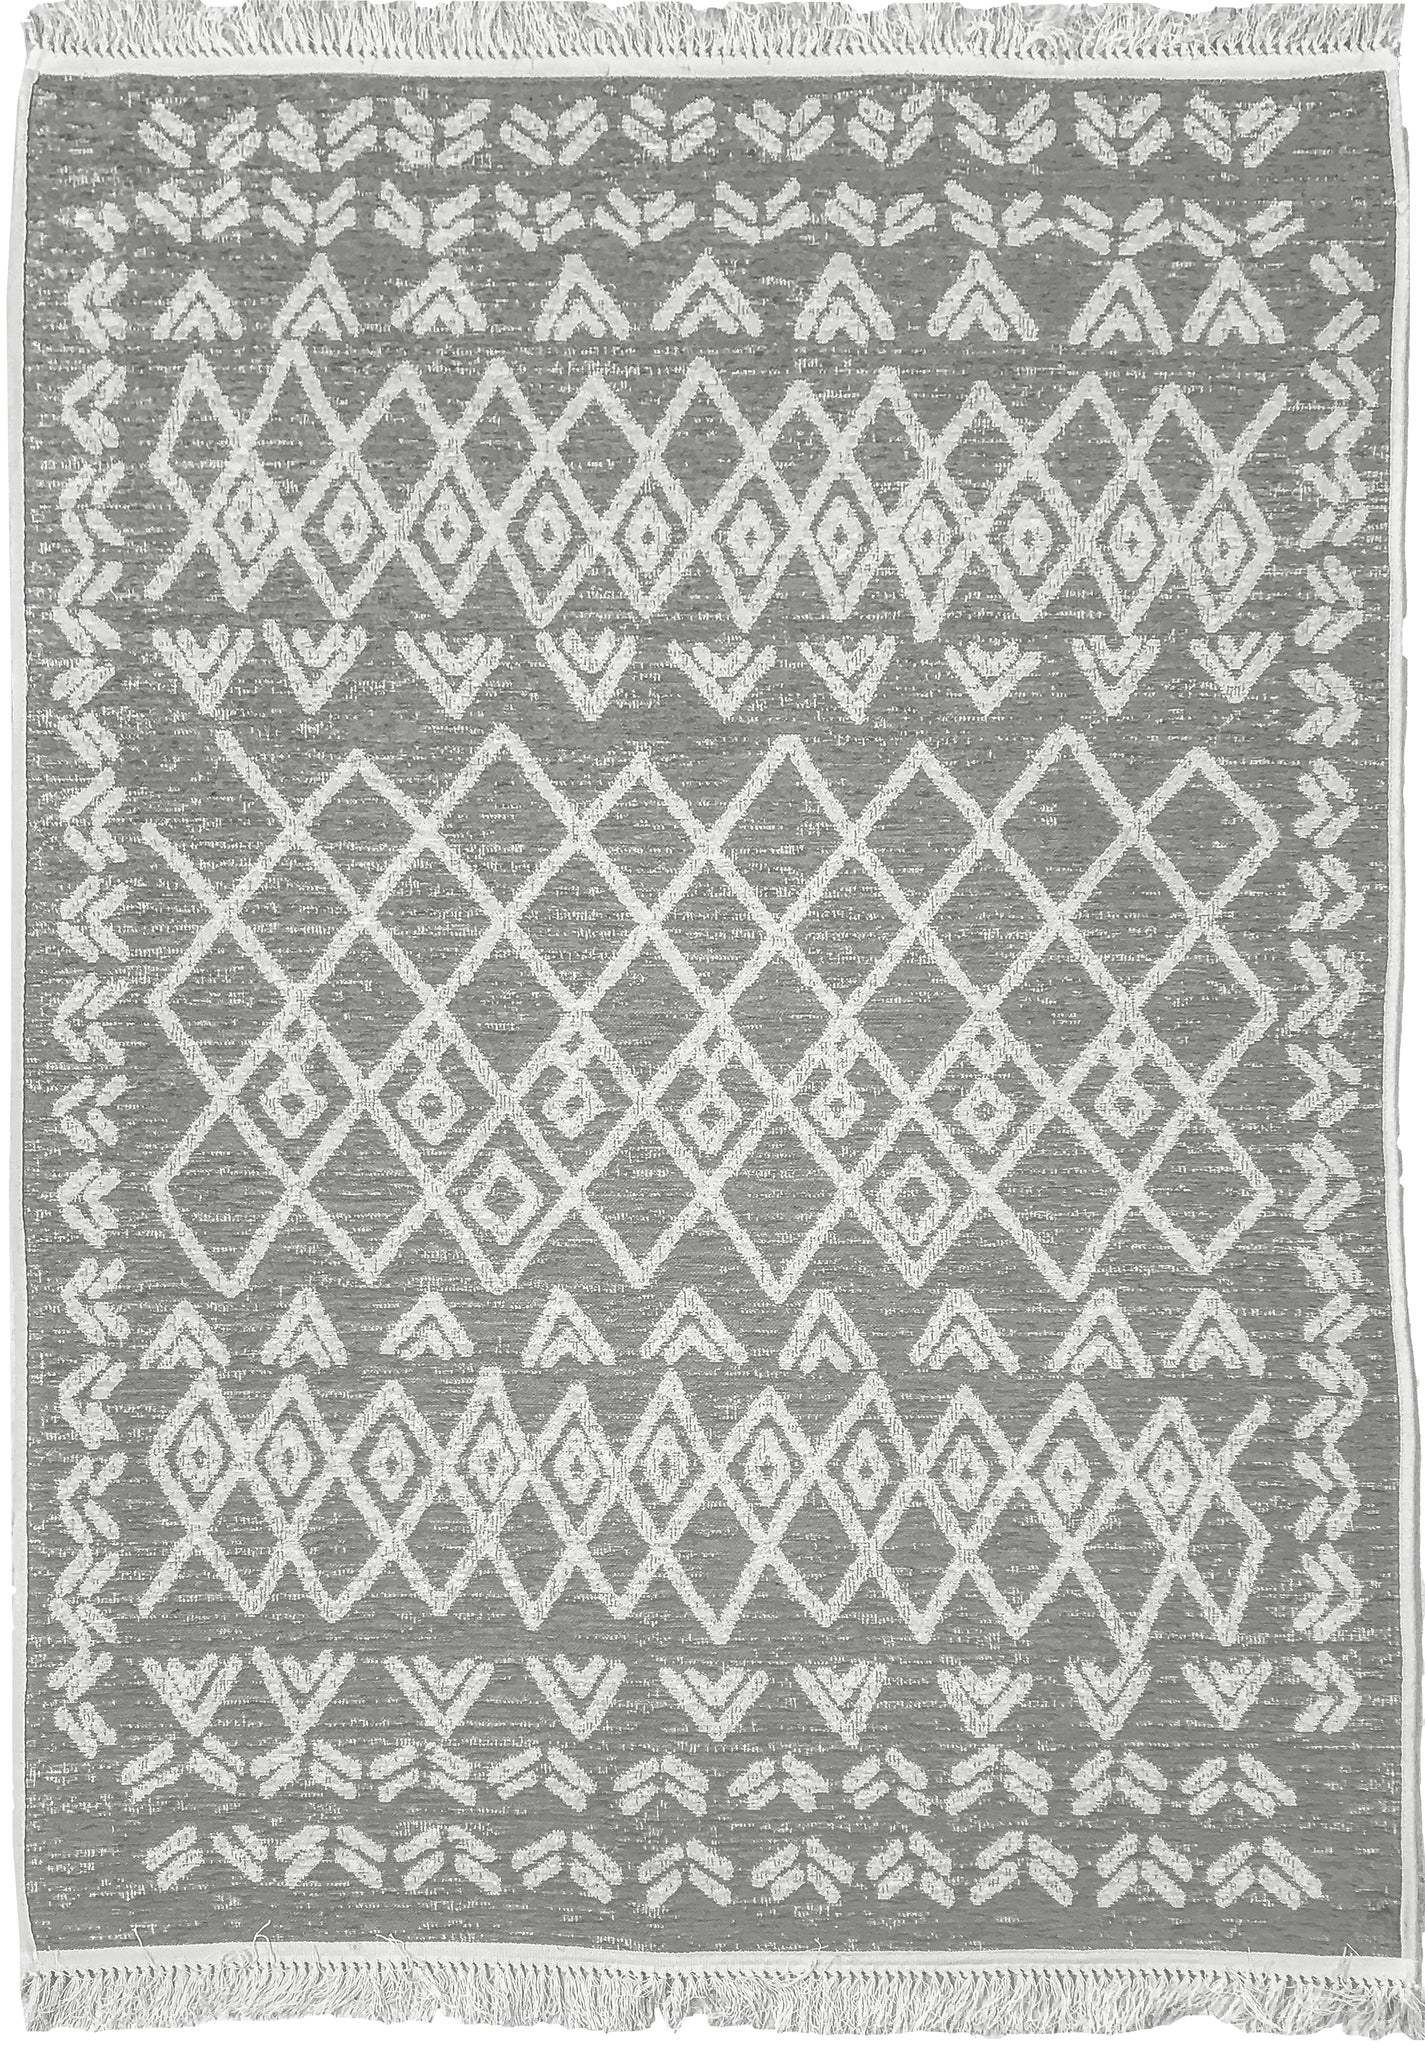 Washable Area rug | Simon & Yildirim Reversible Fade | Gray & Beige | 9x11 | By MotherRuggers.com | Machine Washable | Jacquard Woven | Uniquely Reversible | Pet Friendly | Kid Friendly | Machine Wash | Line Dry | Living Room | Covered Patio | Entry Way | Bedroom | High-Traffic | Three-year warranty with proper care | Shake or light Vacuum | Machine Wash as needed | Dry Flat or Line Dry | Dries fast